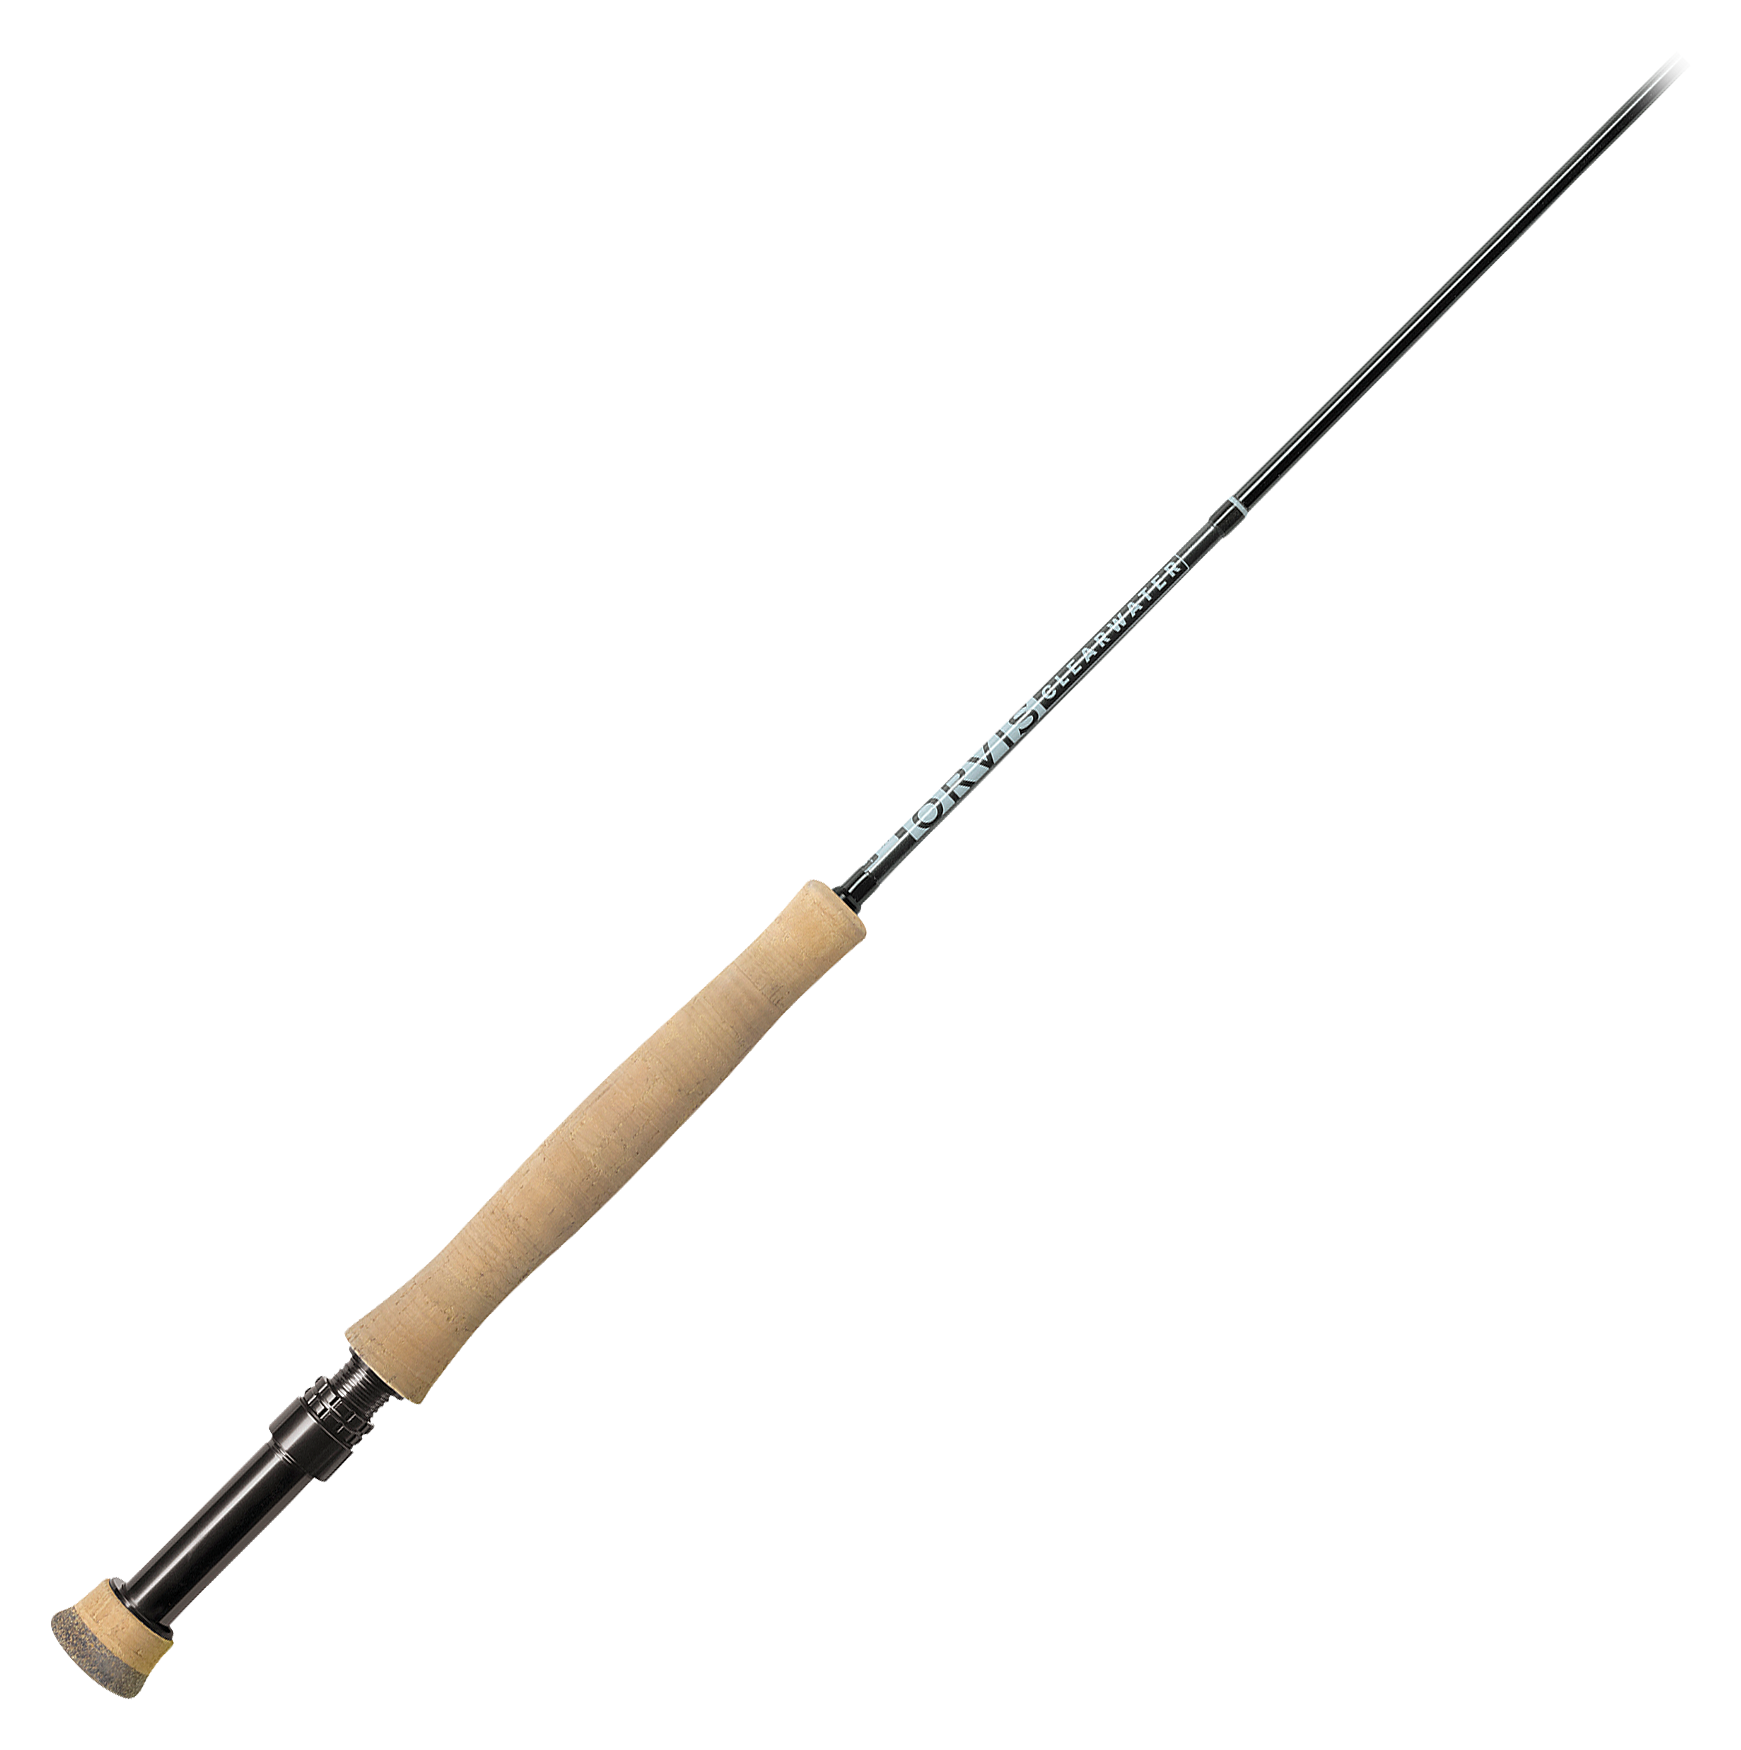 Orvis Clearwater Travel Fly Rod - 2S715151